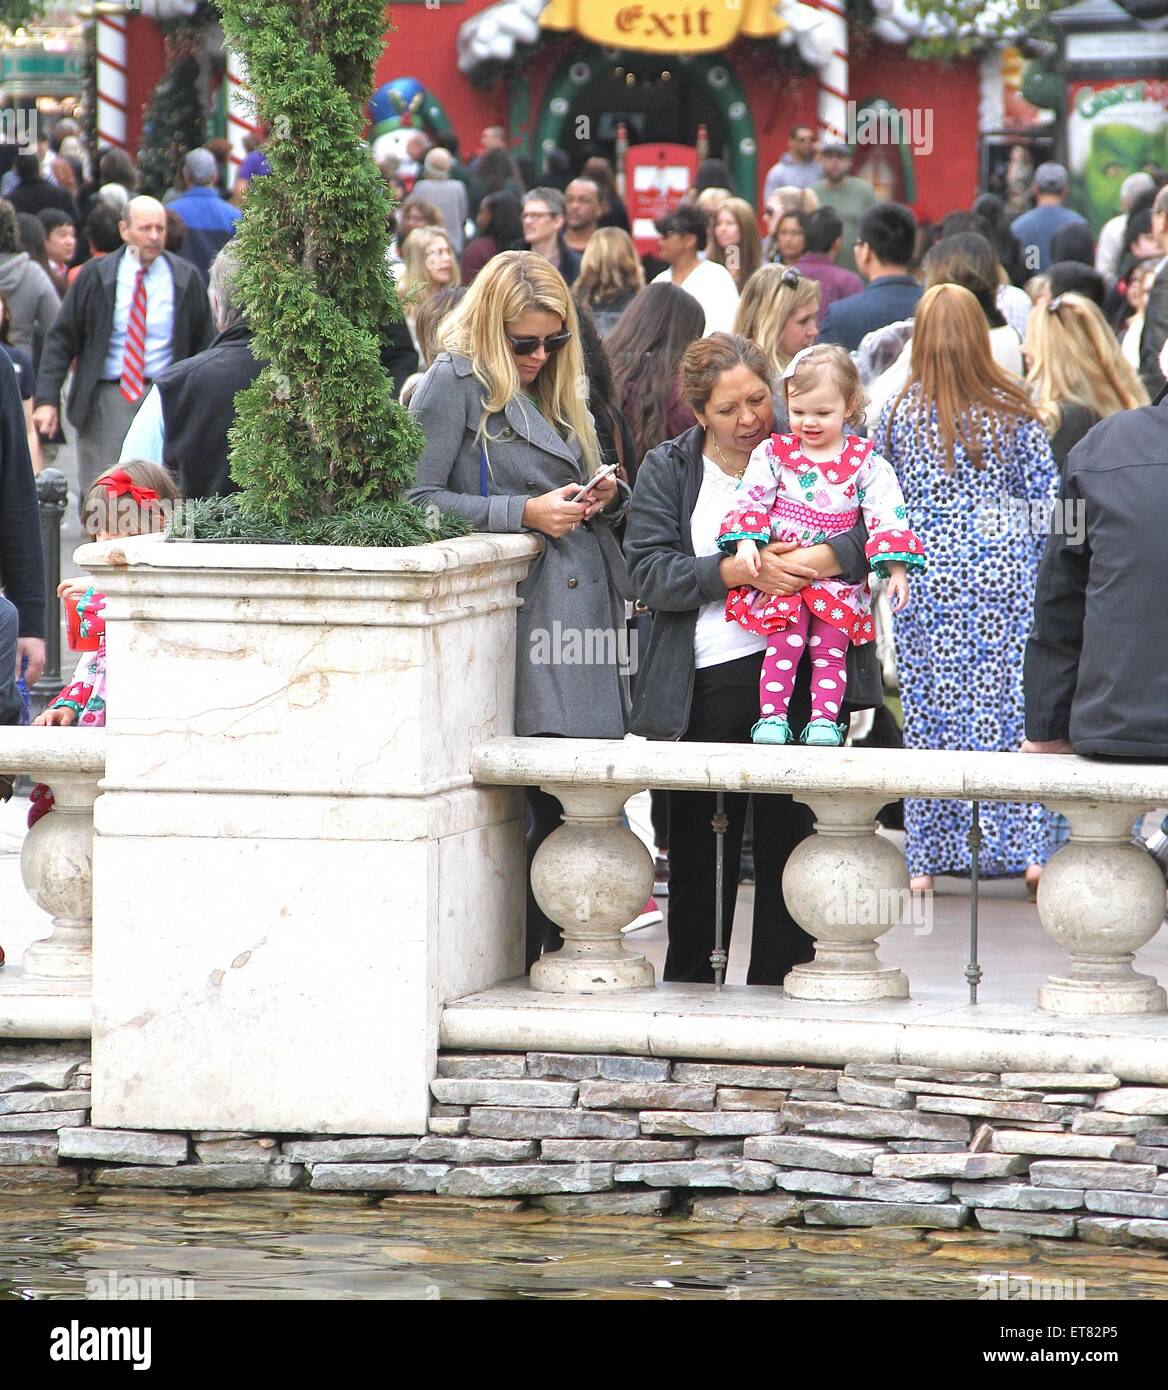 Busy Philipps spotted shopping at The Grove with her two daughters, Birdie and Cricket Silverstein  Featuring: Busy Philipps, Birdie Silverstein, Cricket Silverstein Where: Hollywood, California, United States When: 19 Dec 2014 Credit: WENN.com Stock Photo